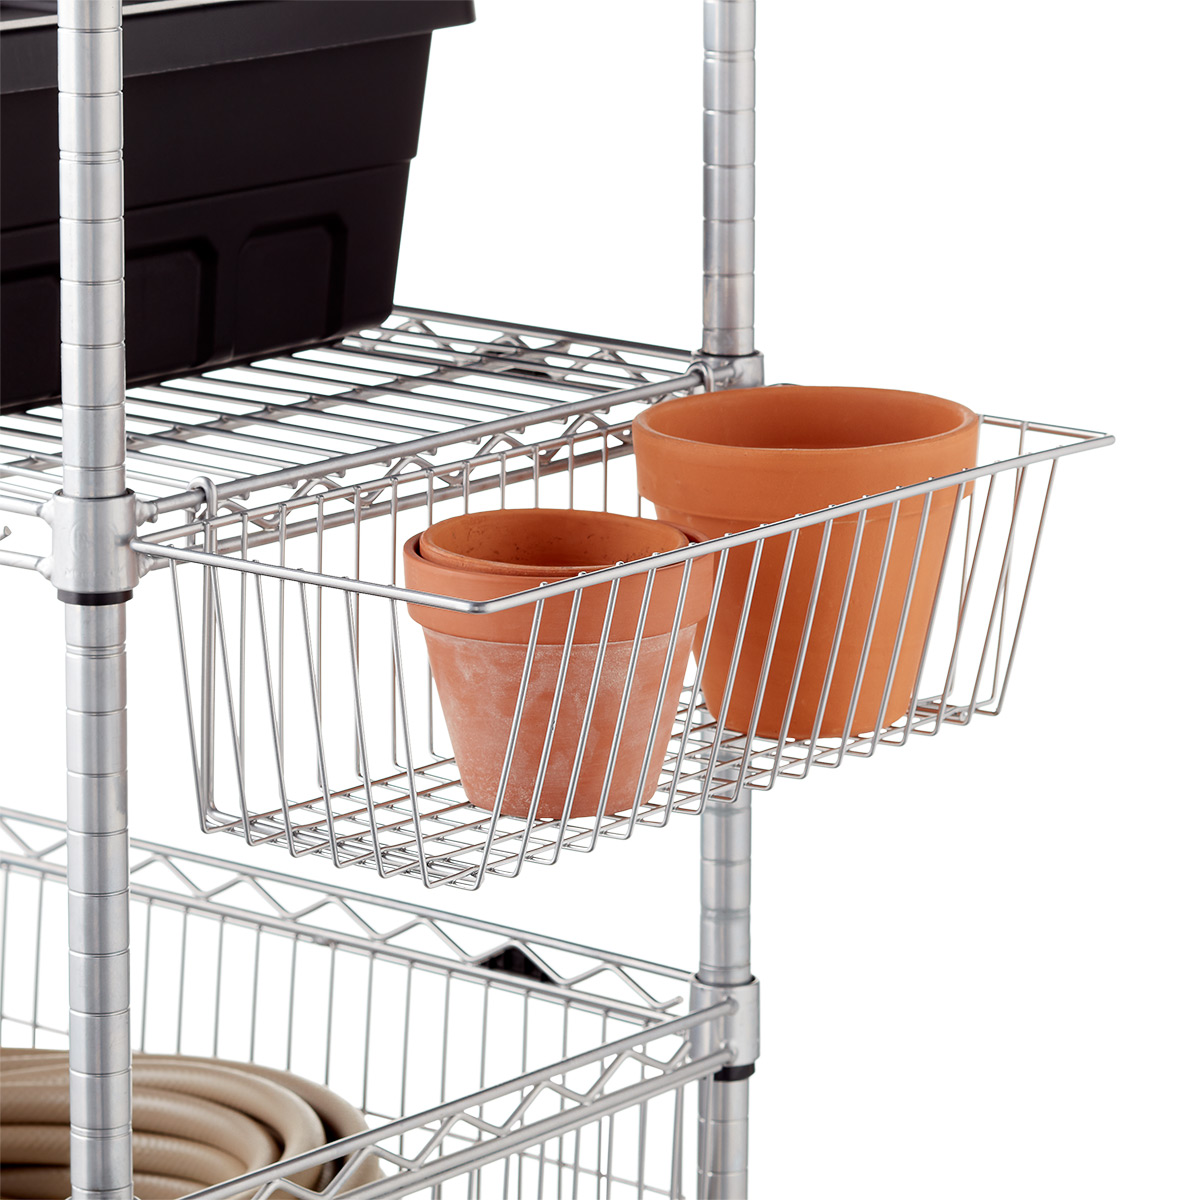 https://www.containerstore.com/catalogimages/480089/483062-storage-basket-silver.jpg